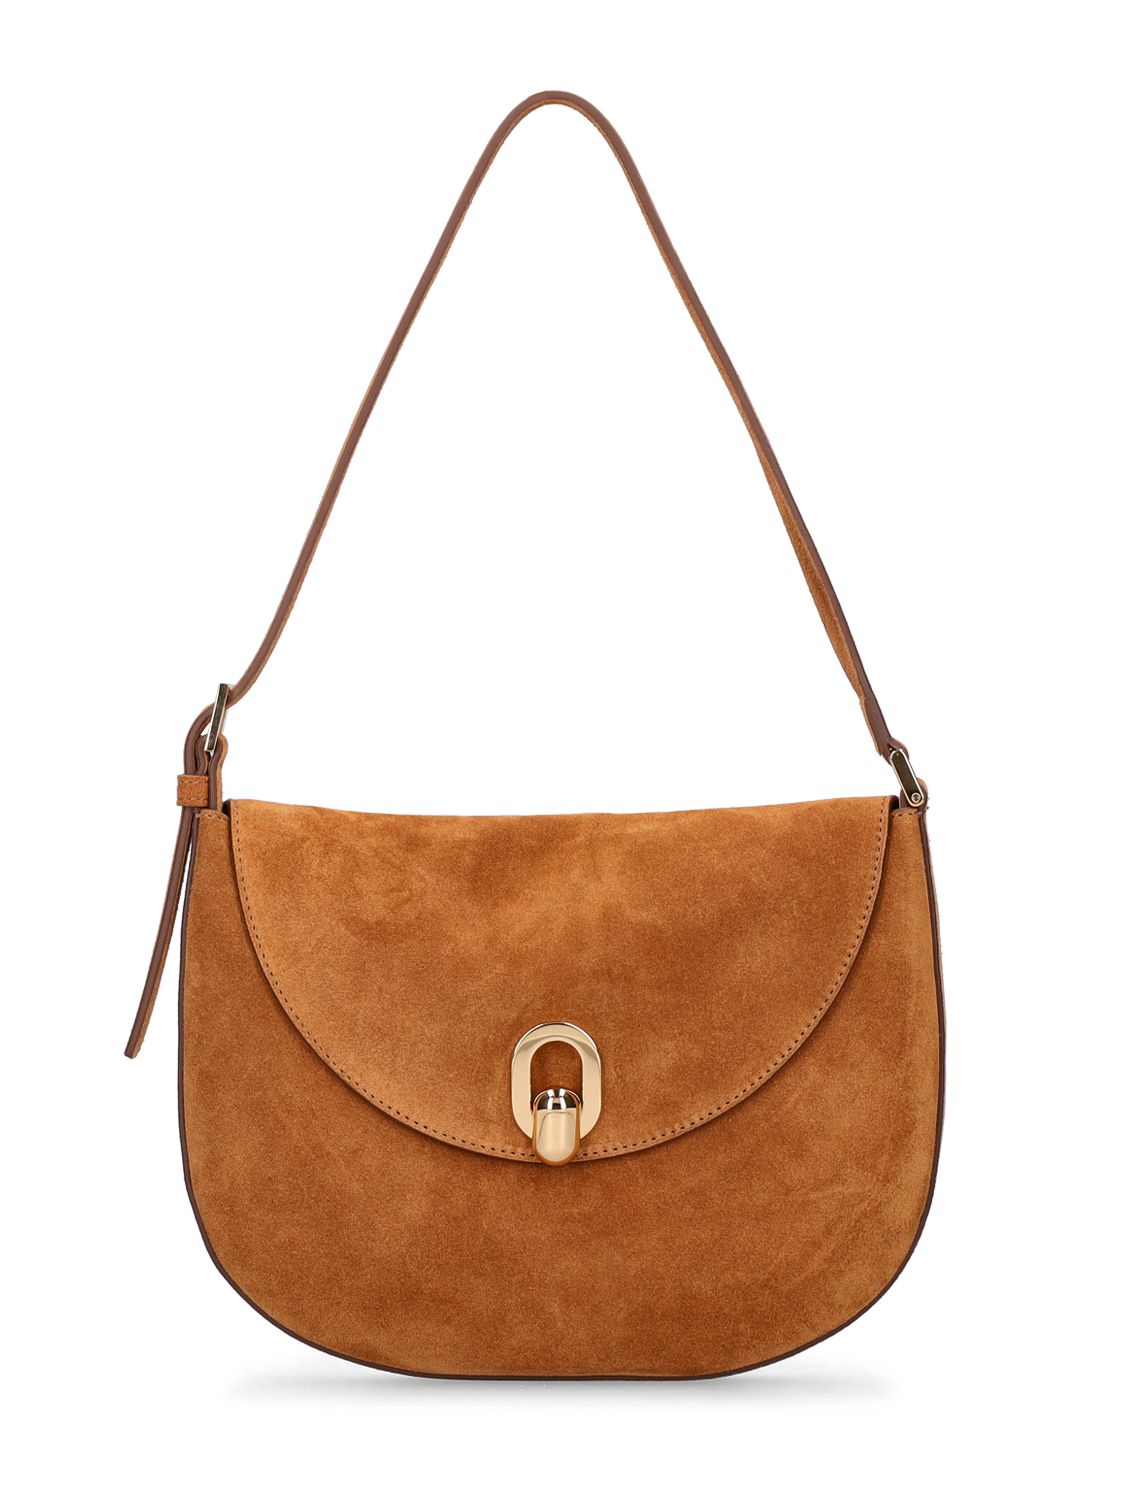 The Tondo Suede Leather Hobo Bag